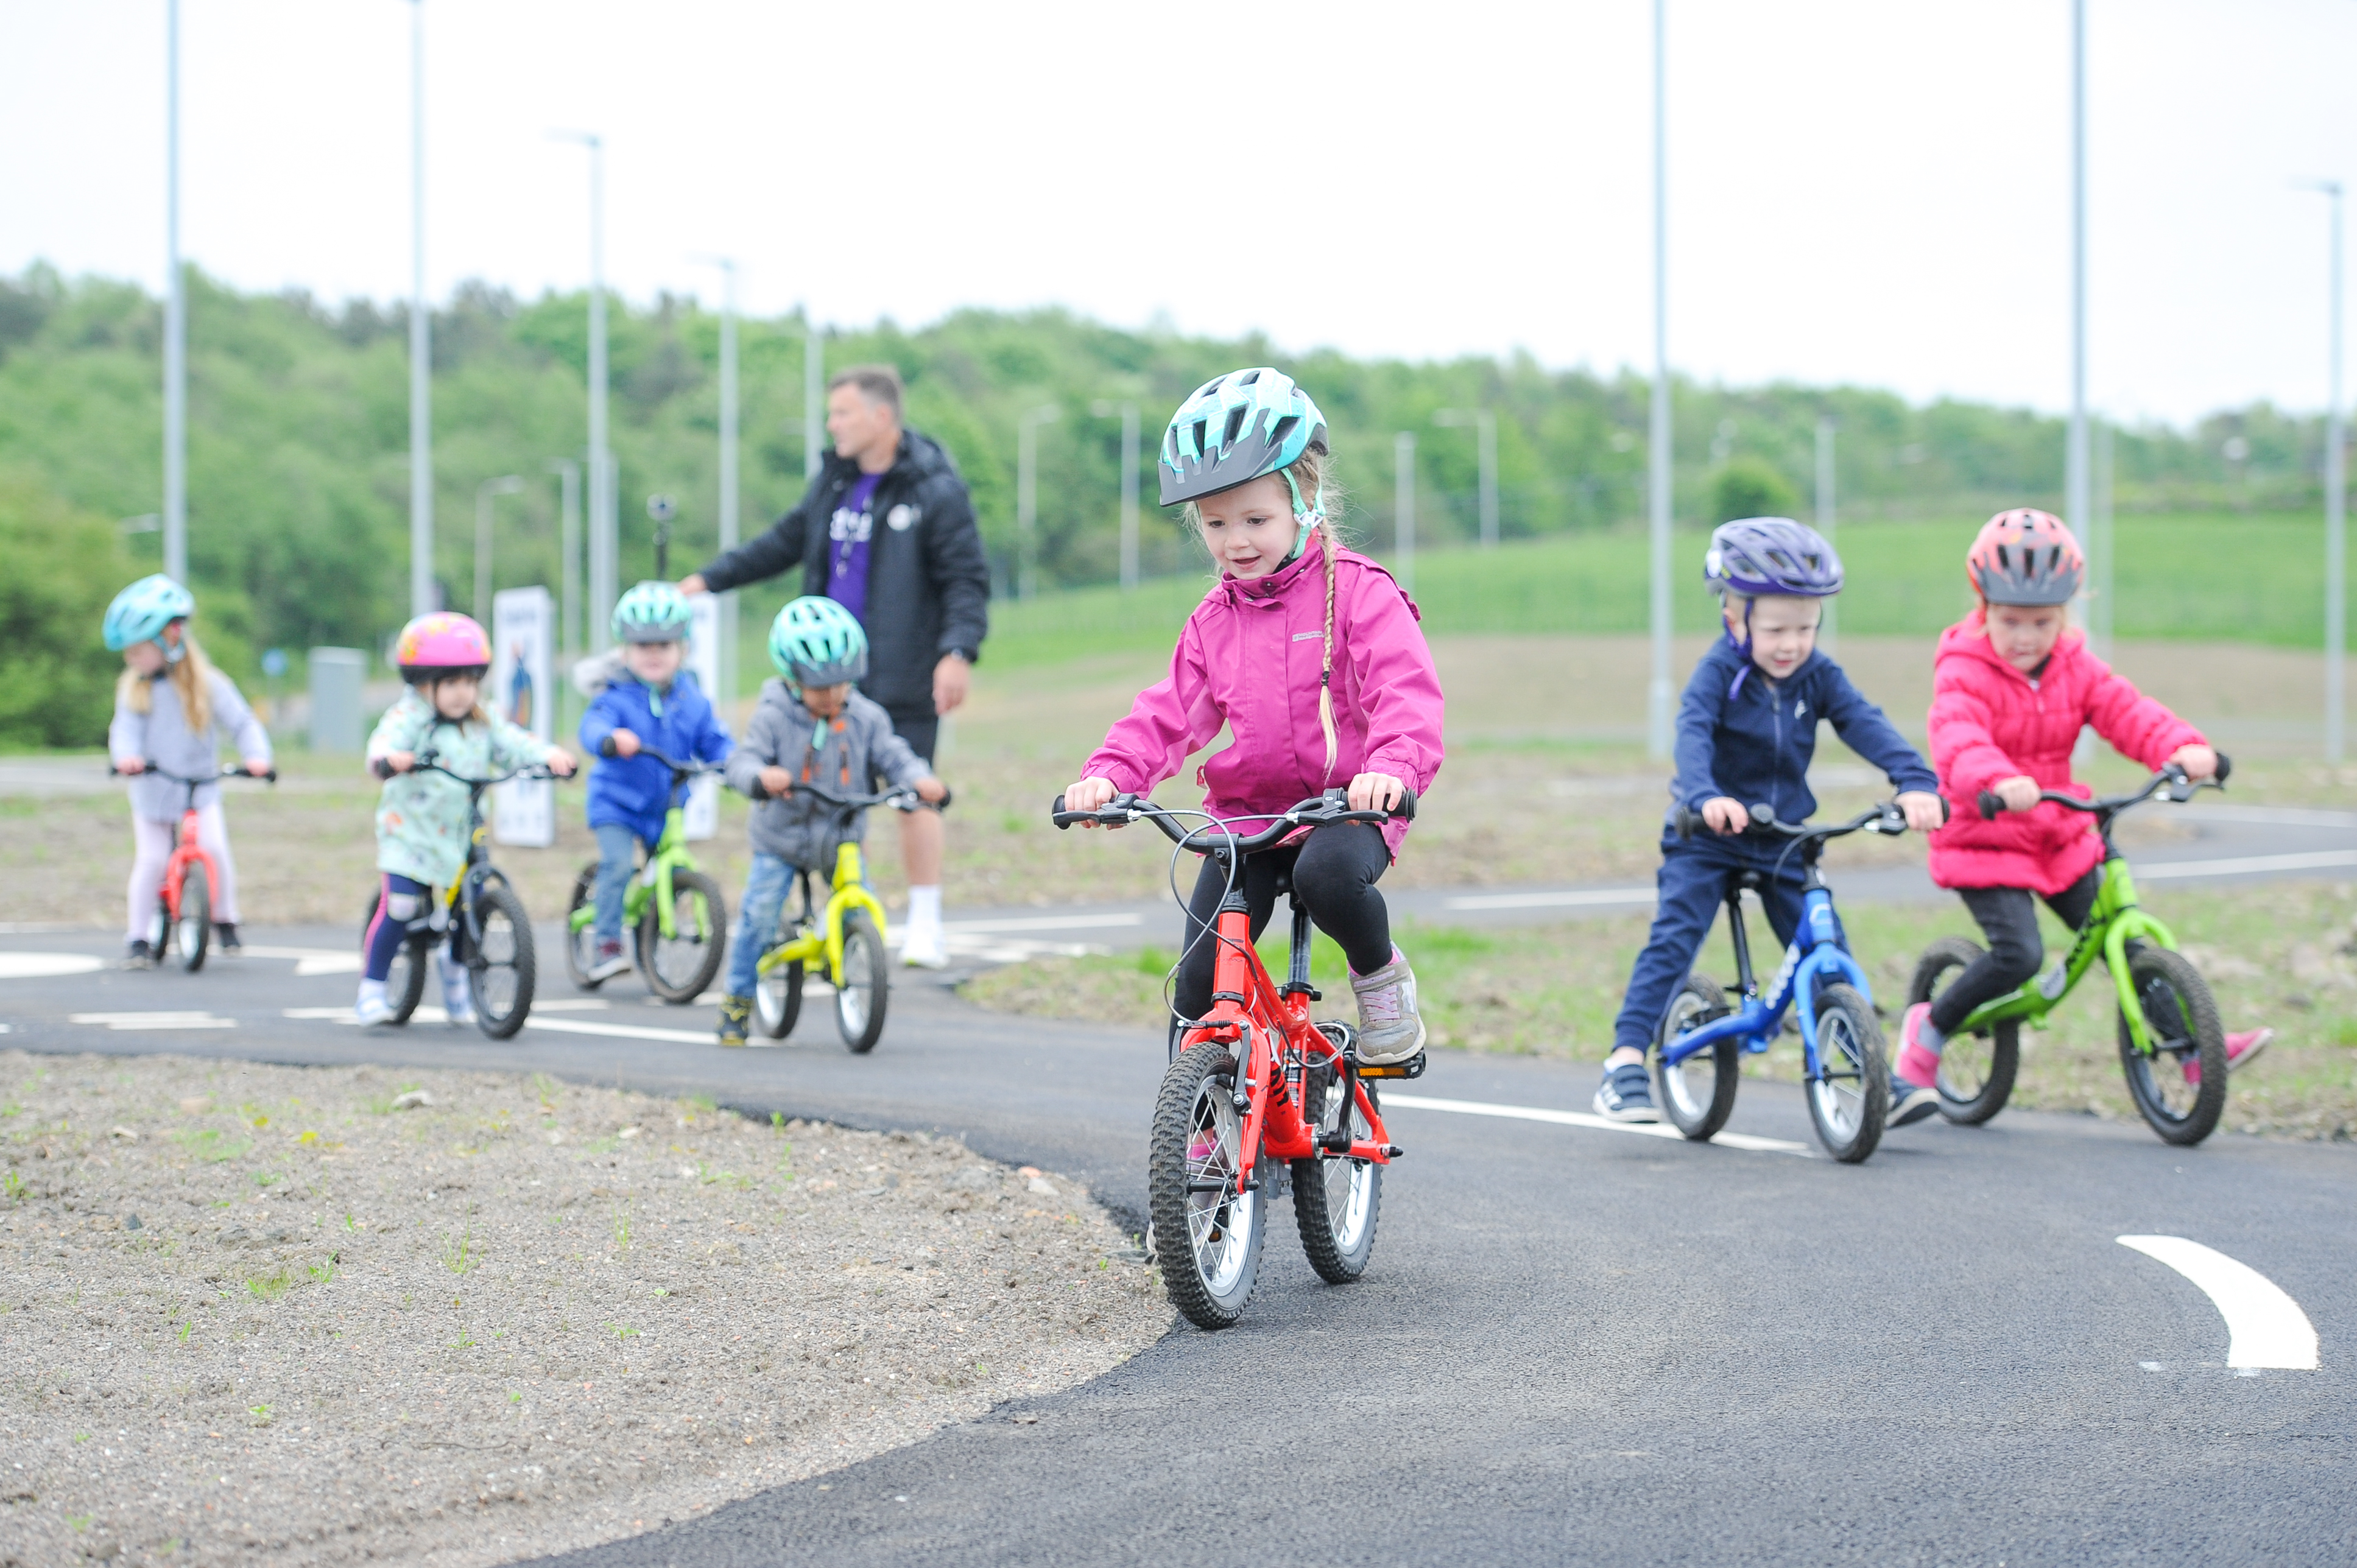 Children learn to ride at the Fife Cycle Park in Lochgelly